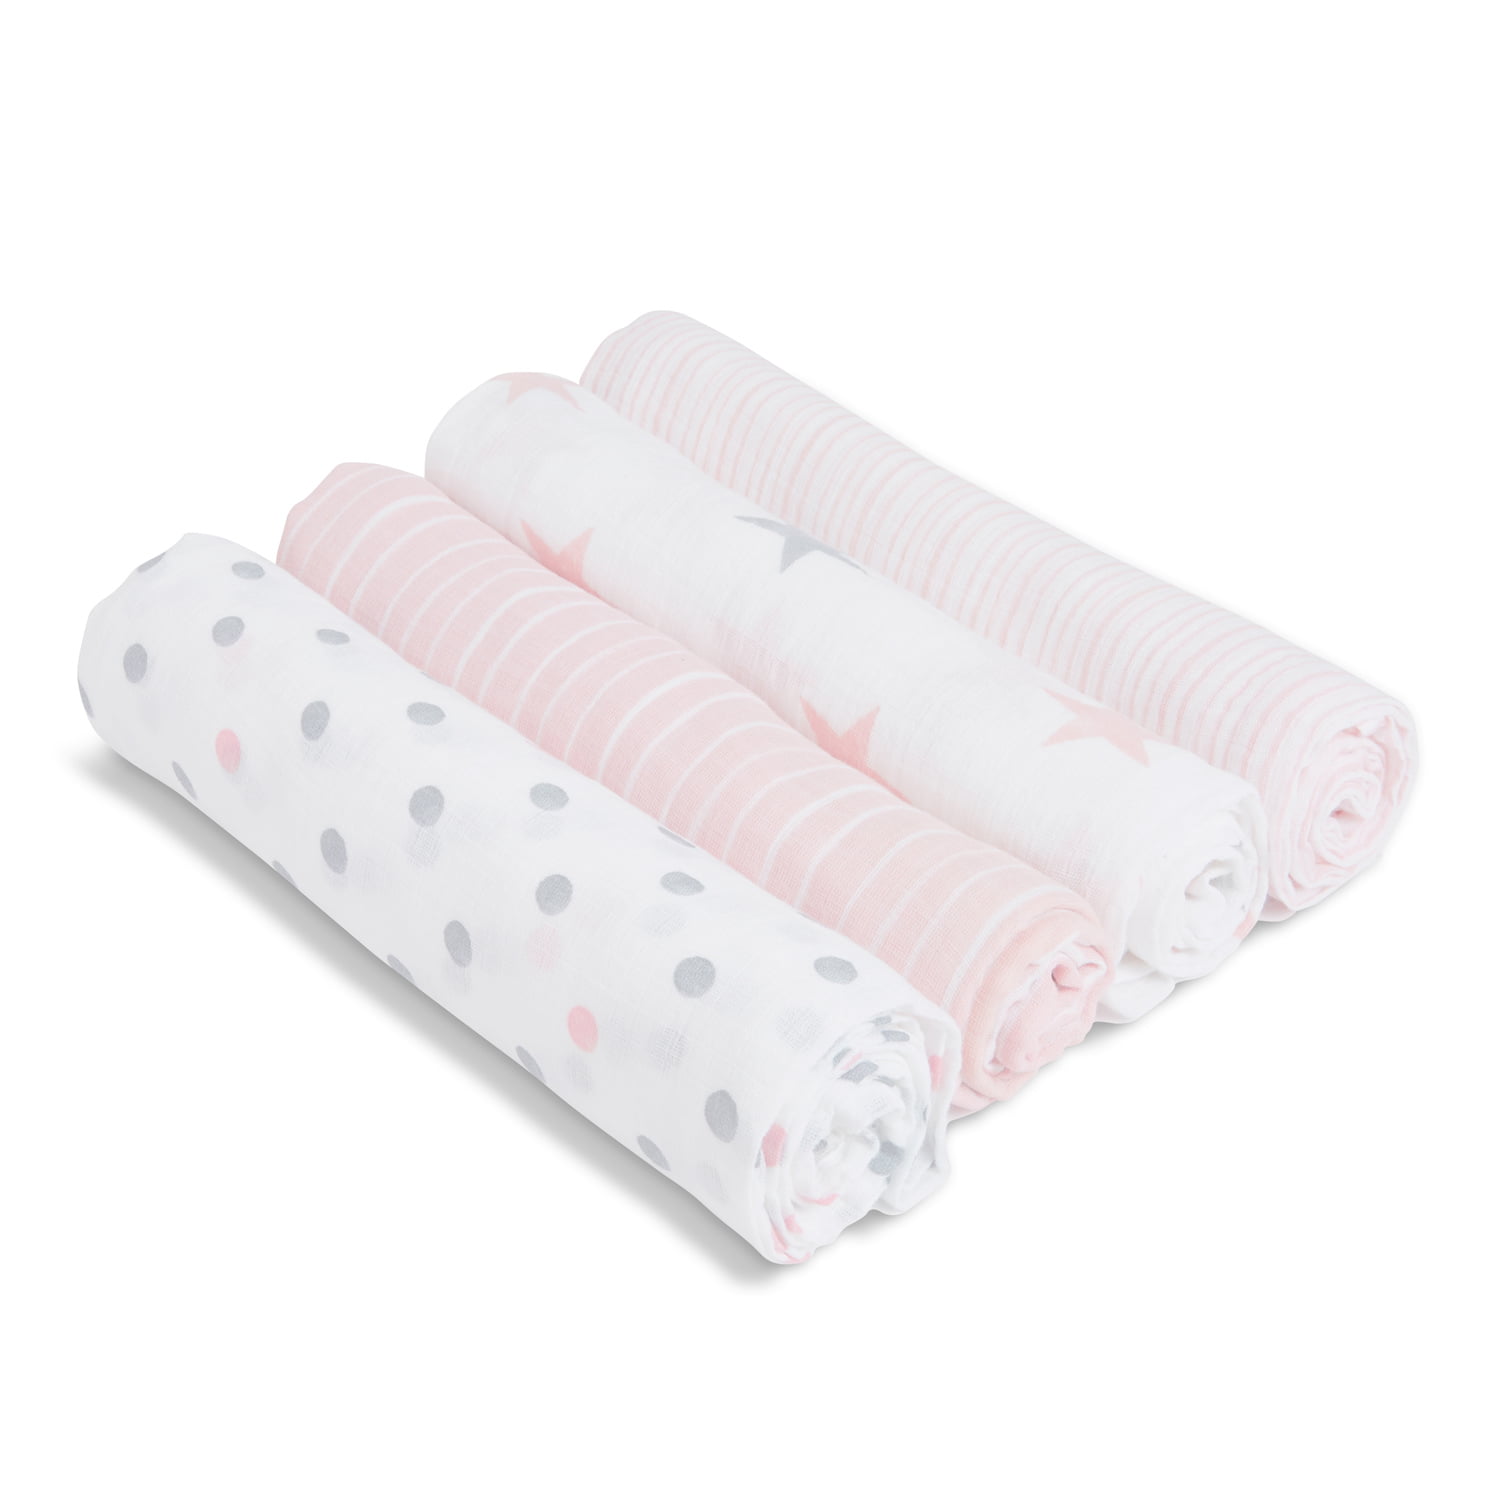 aden + anais Essentials Muslin Swaddle Blankets, 4-pack, Doll Pink